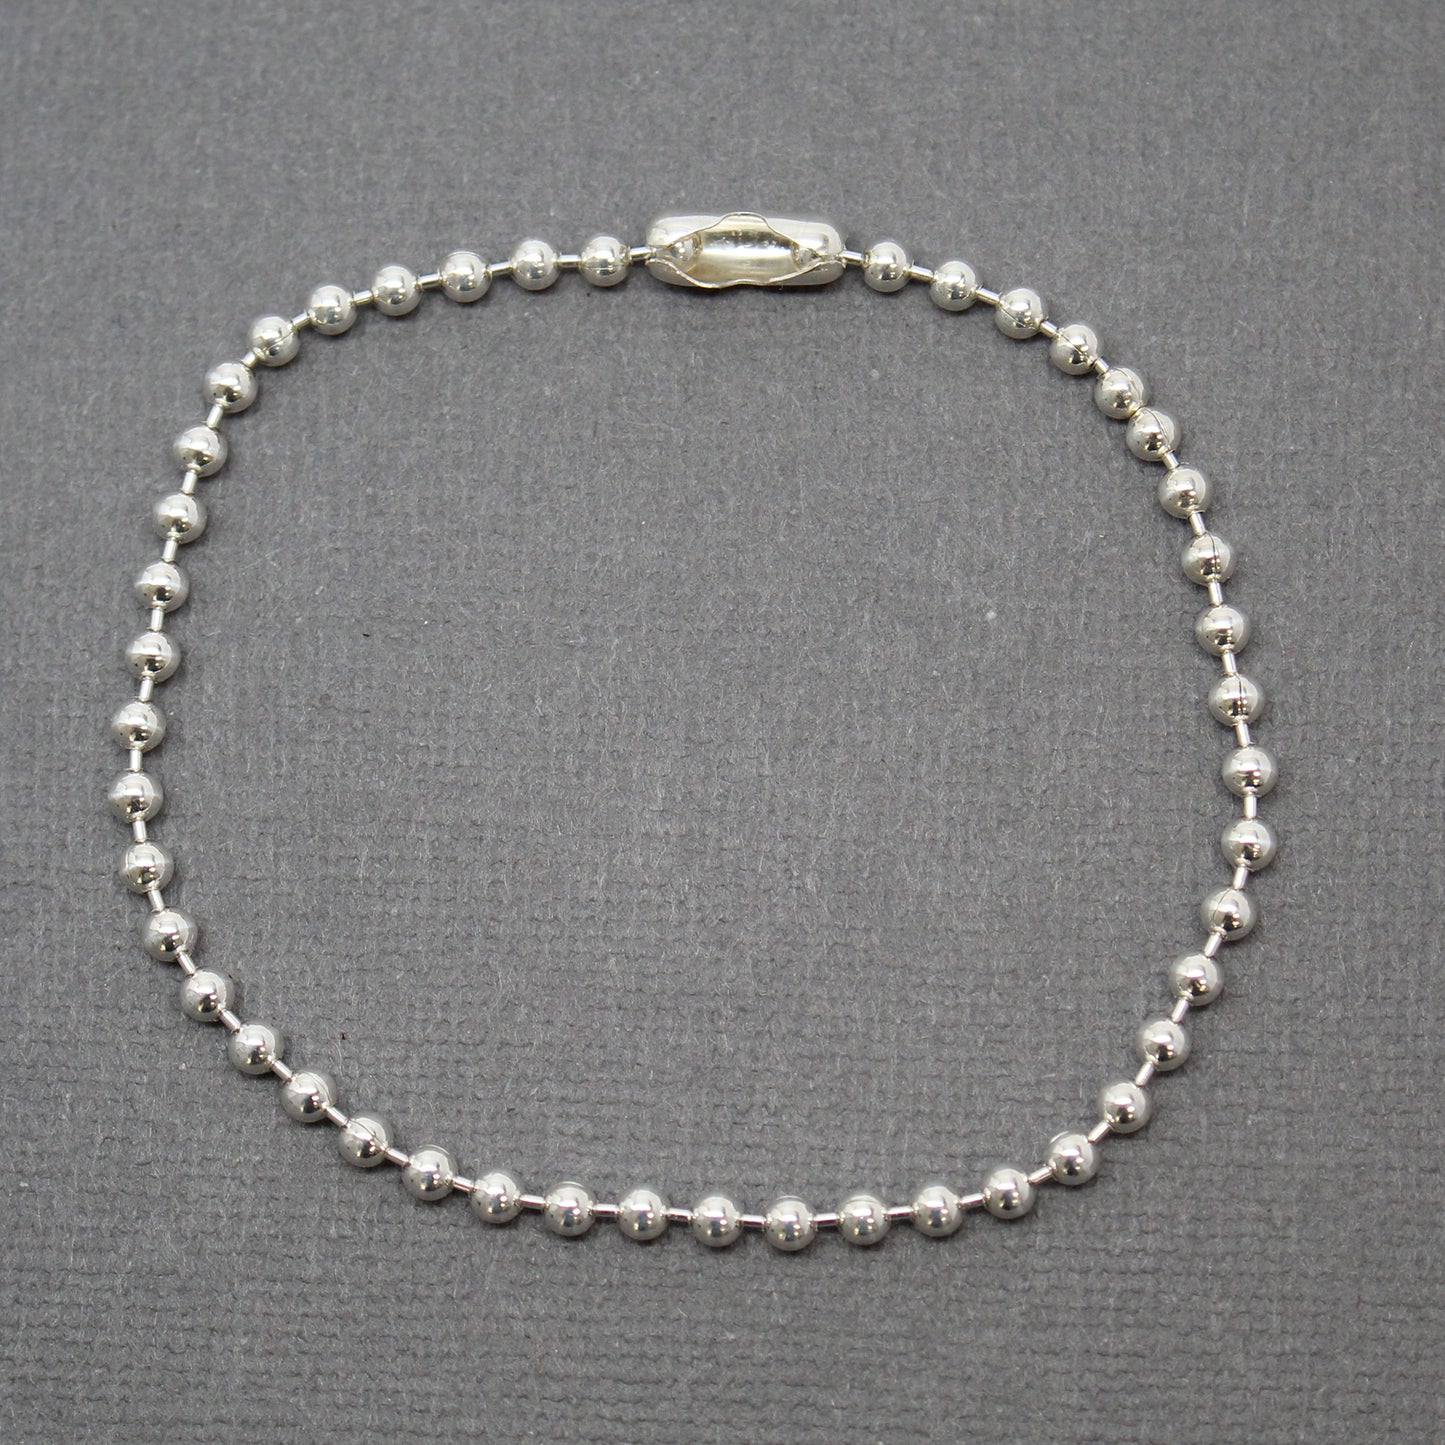 3mm Sterling Silver Bead Ball Chain Bracelet or Necklace